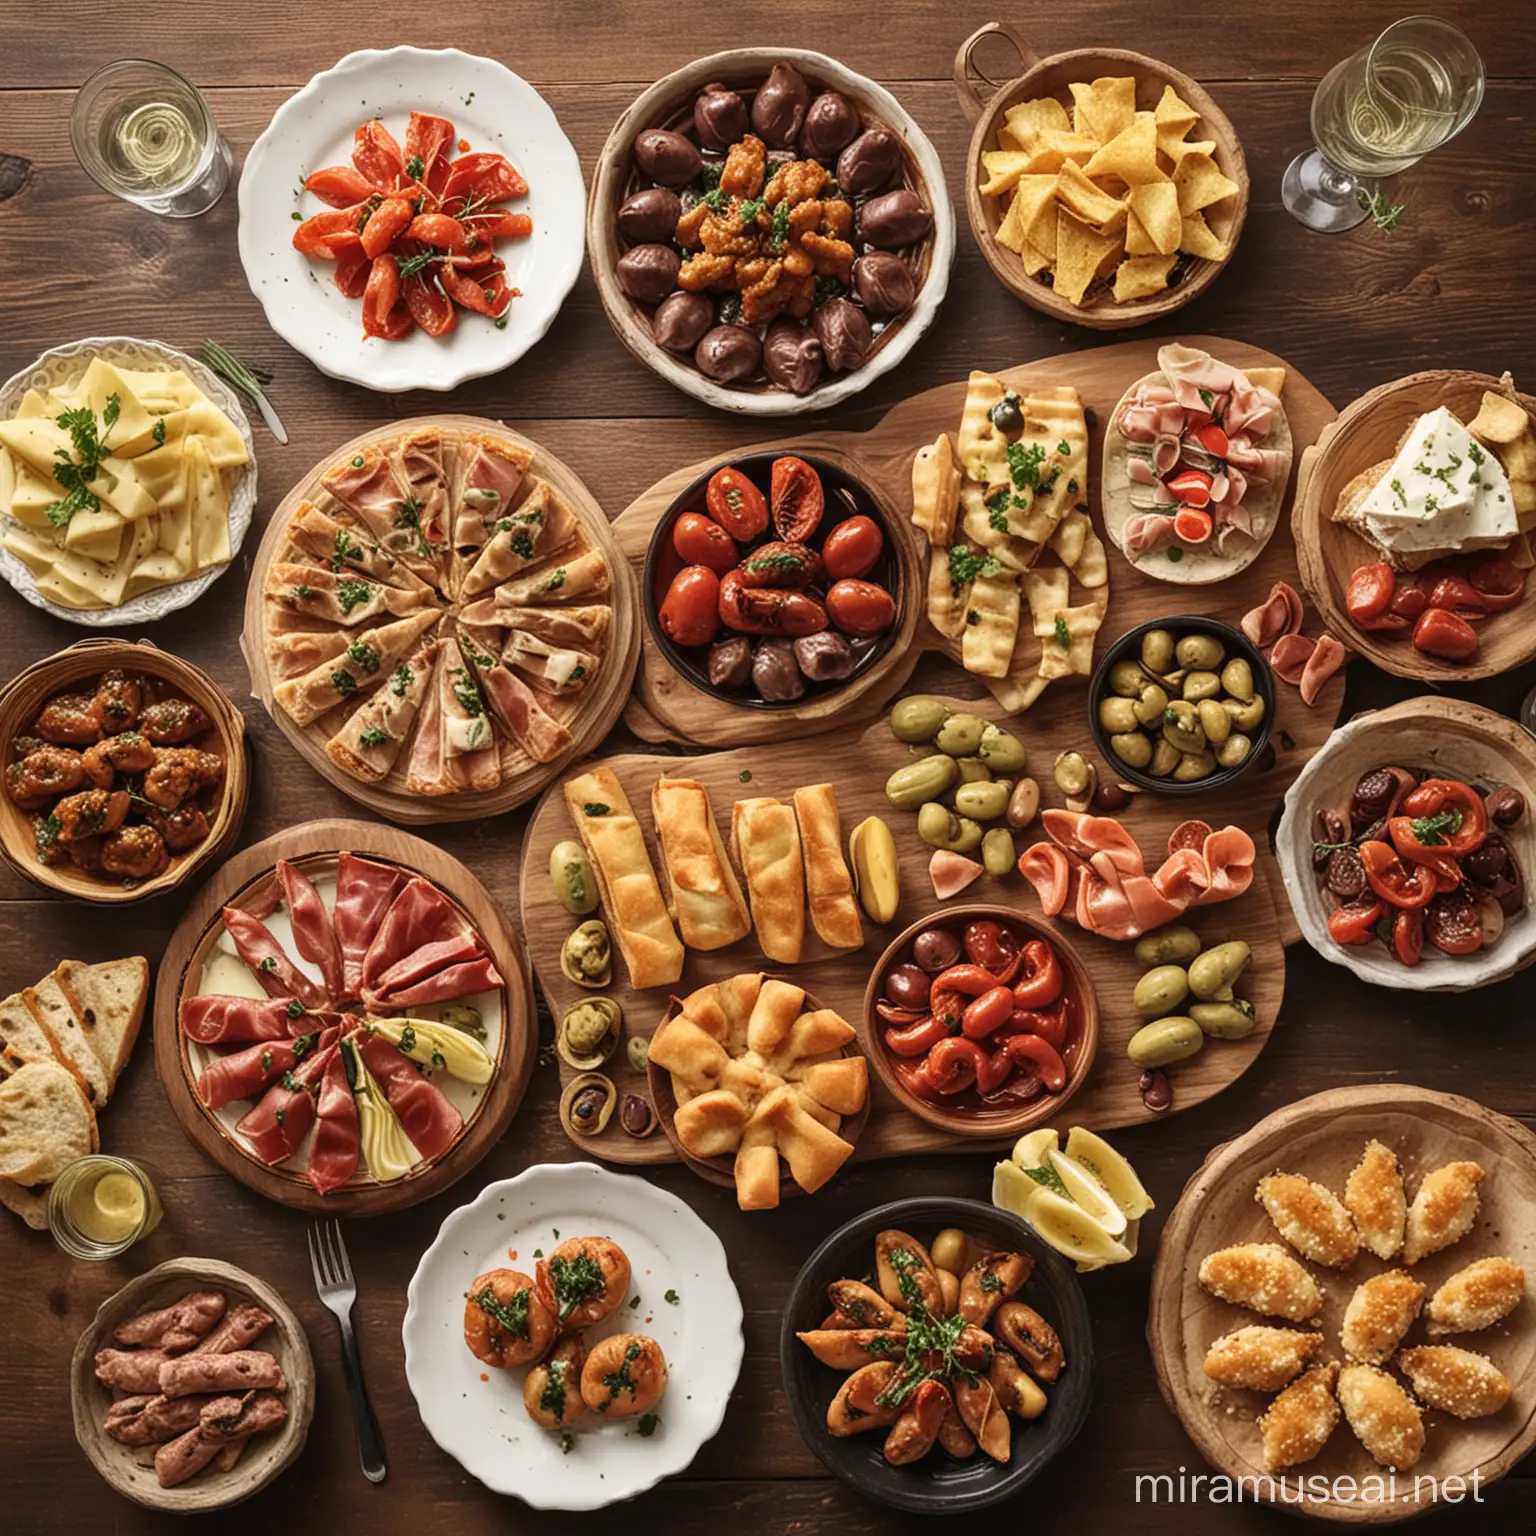 Colorful Tapas Spread Vibrant Spanish Appetizers Display